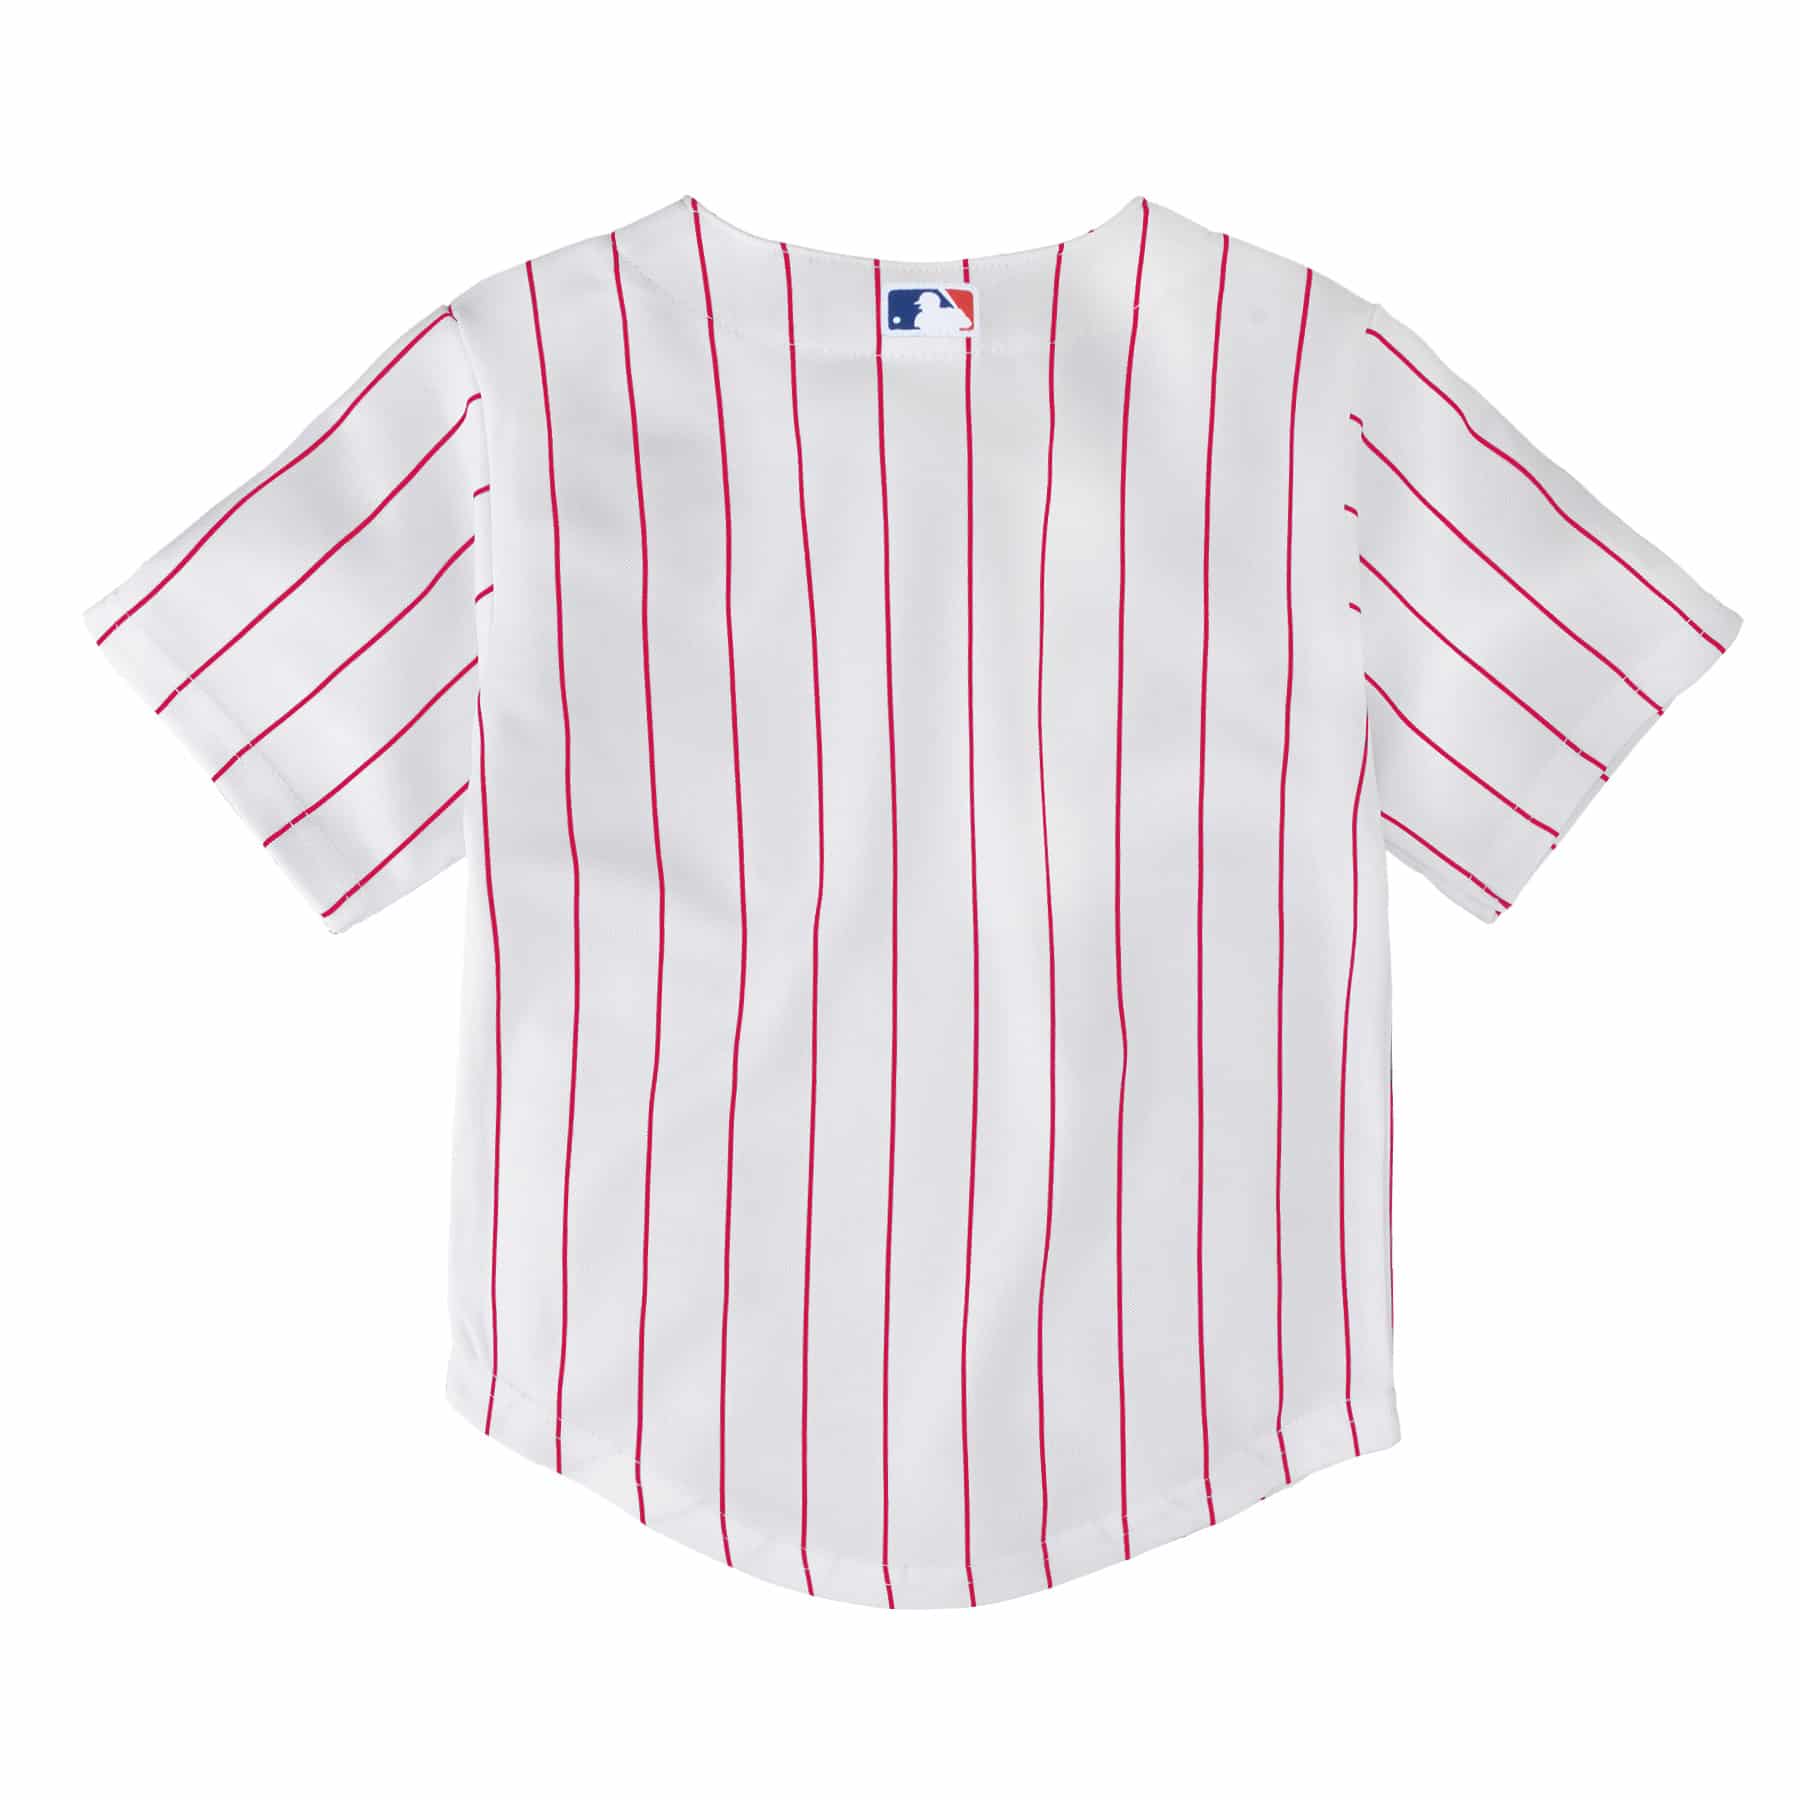 Philadelphia Phillies Baby White Home Pinstriped Jersey - Detroit Game Gear